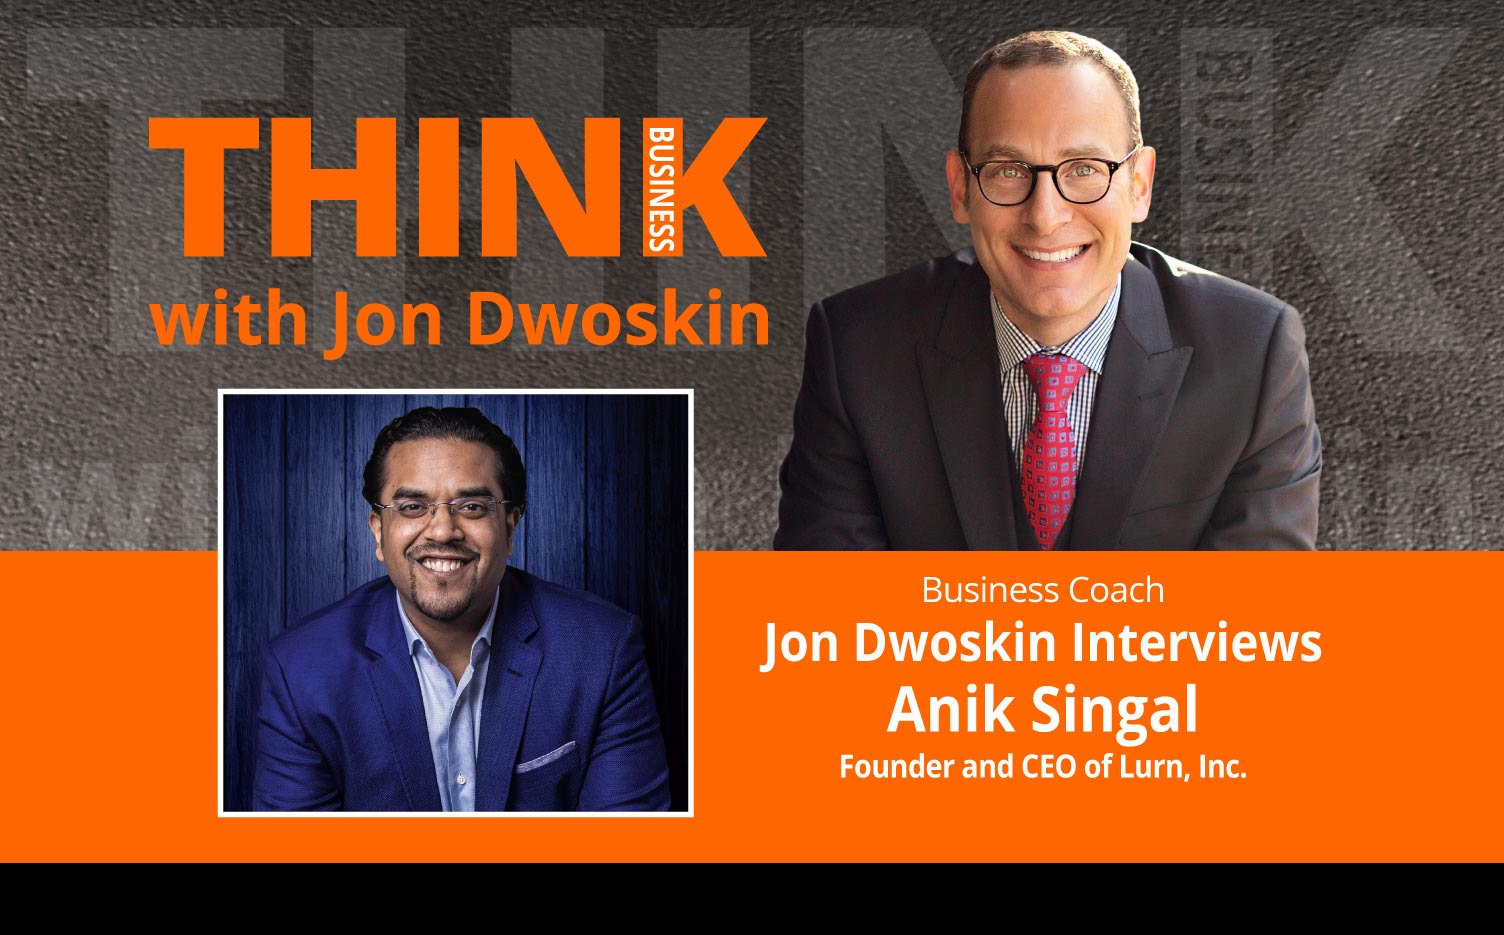 THINK Business Podcast: Jon Dwoskin Interviews Anik Singal, Founder and CEO, Lurn, Inc.